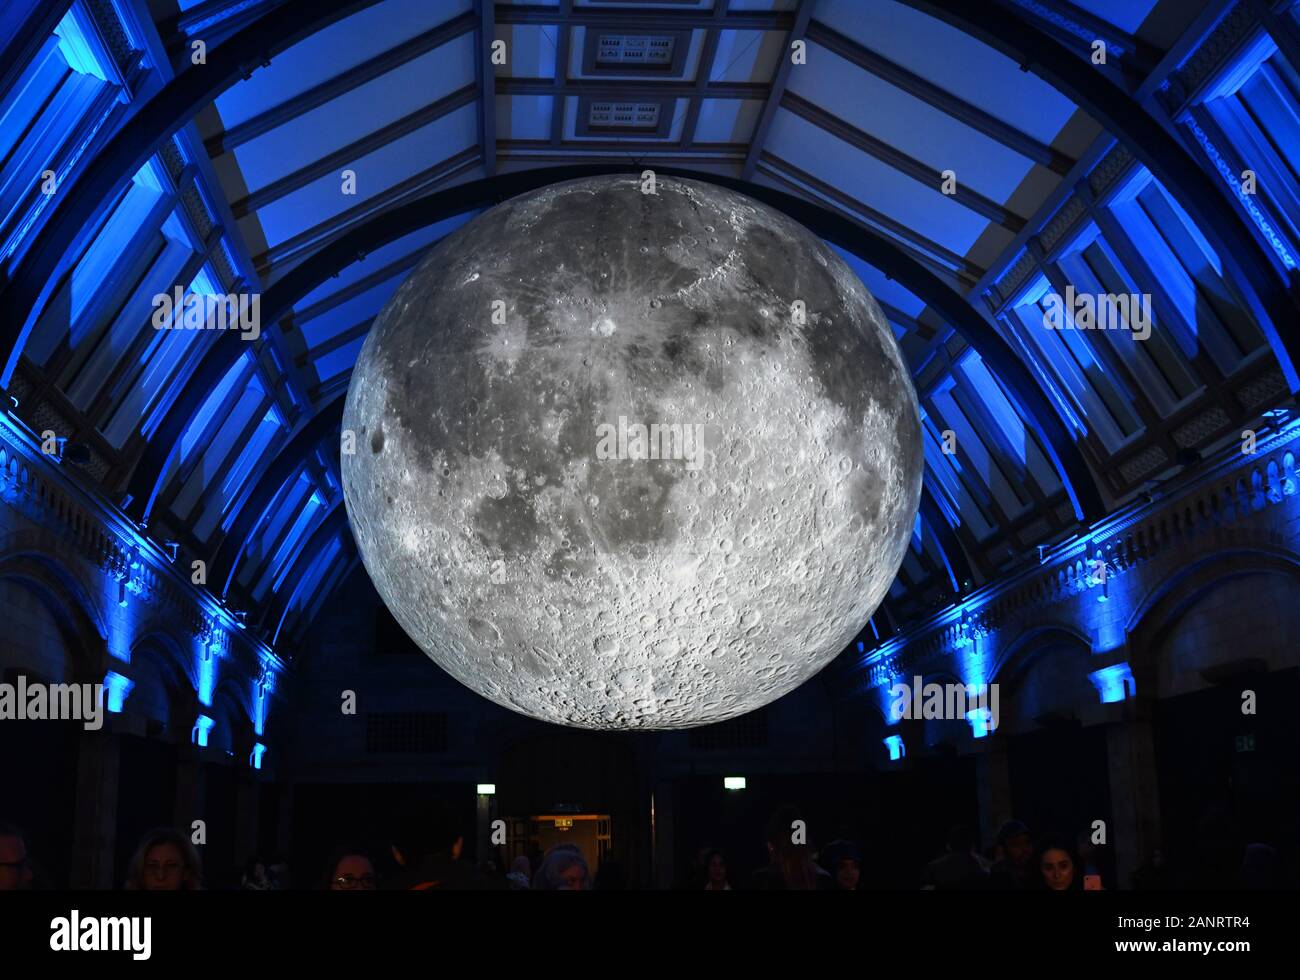 Museum of the Moon, a touring artwork by UK artist Luke Jerram. On display in the Natural History Museum, London, England, UK. May 2019 - January 2020 Stock Photo